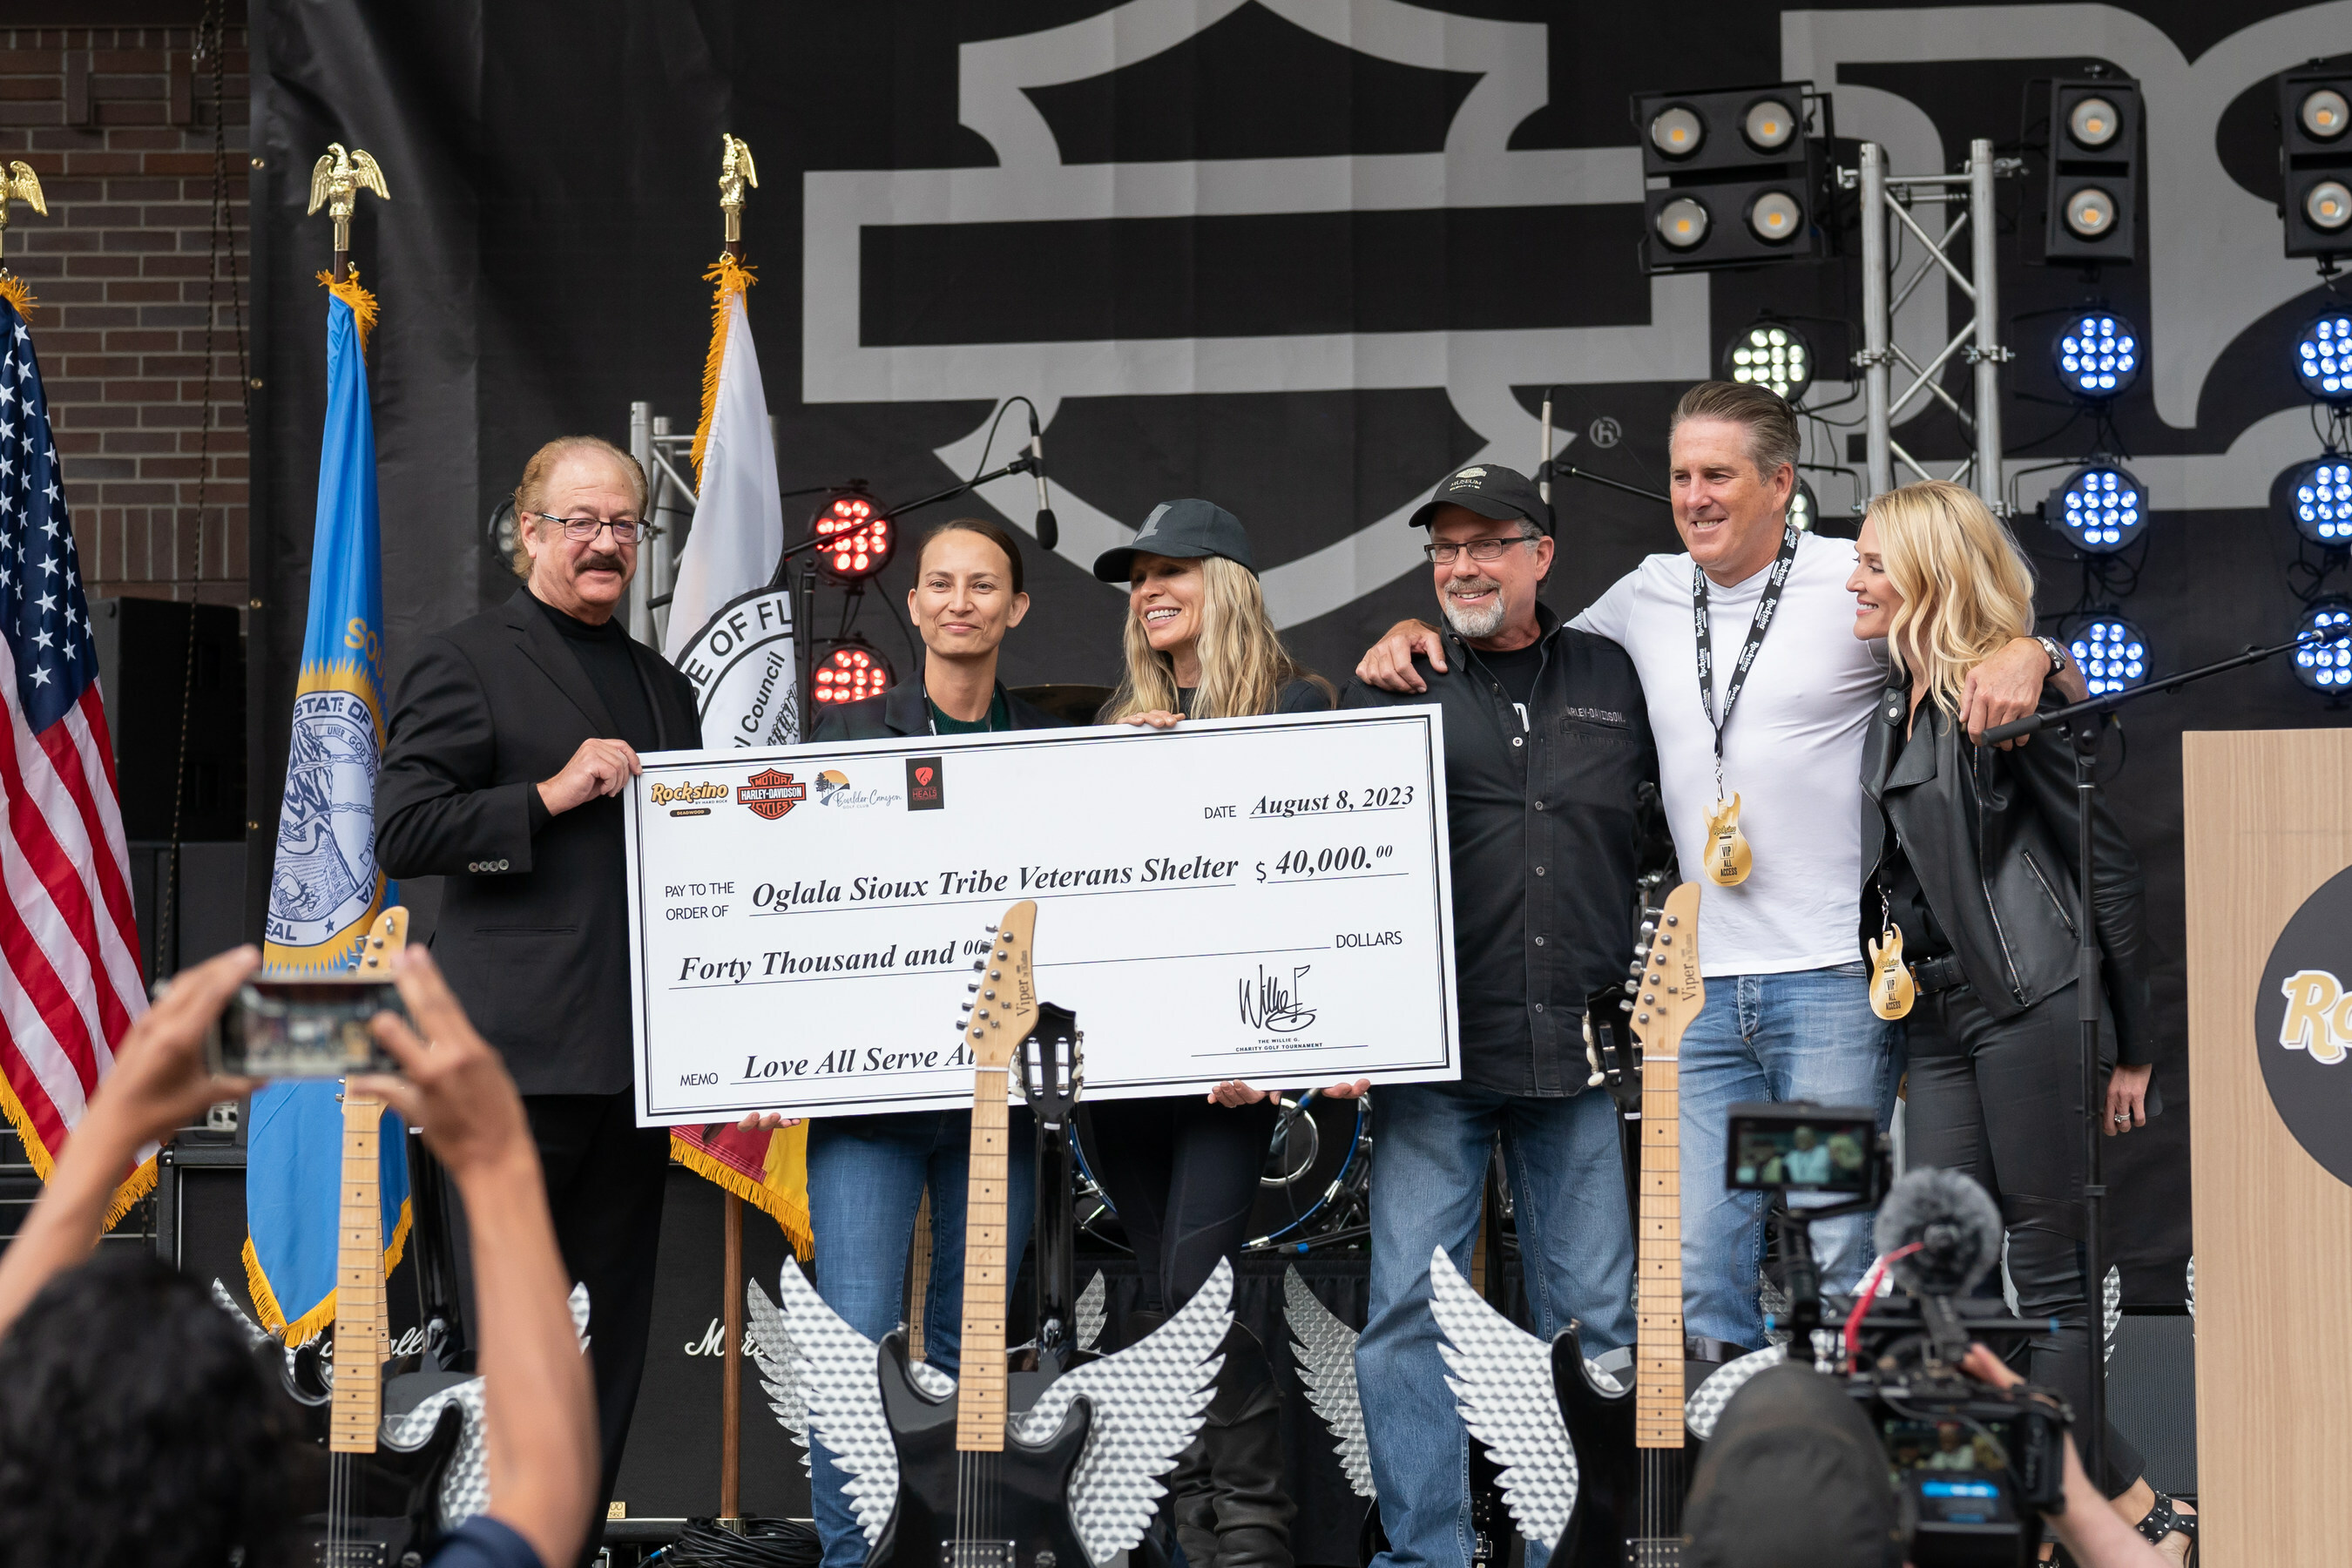 Hard Rock International COO Jon Lucas, Oglala Sioux Tribe Vice President Dr. Alicia Mousseau, Karen and Bill Davidson of the Harley-Davidson Motor Co., and Marlin and Camille McMakin of the Boulder Canyon Golf Club accepting a $40,000 donation.